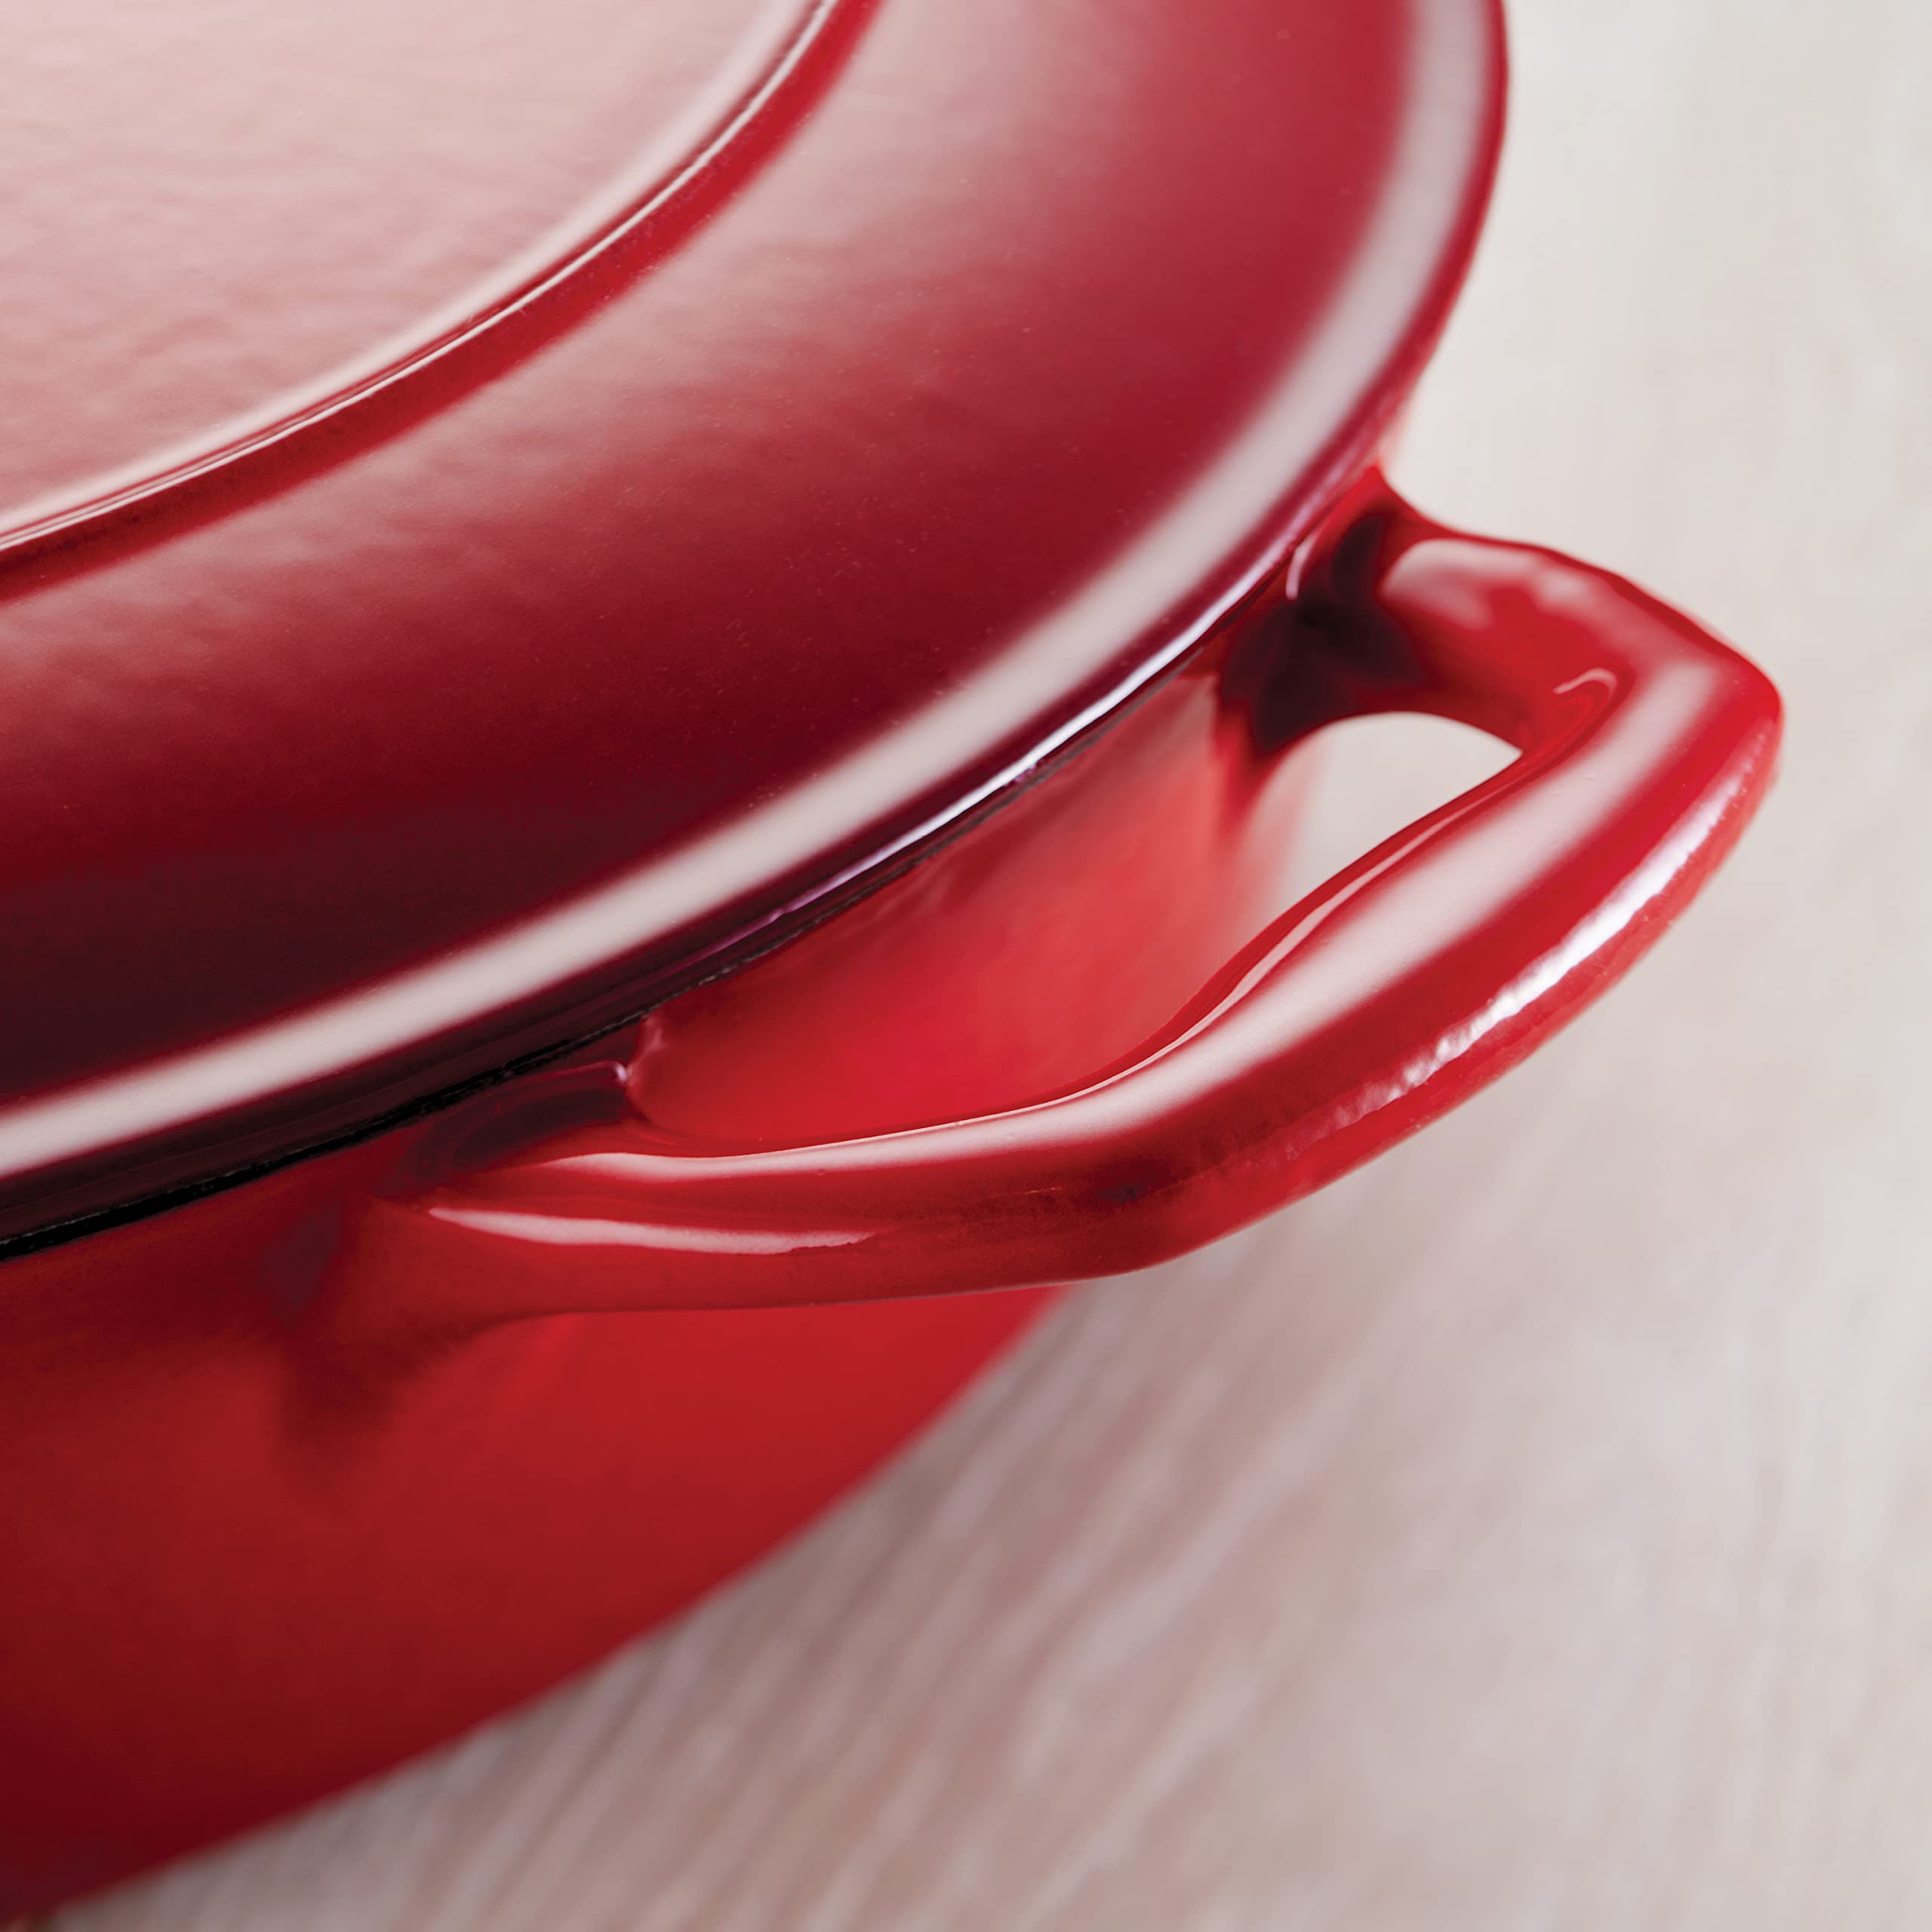 Tramontina Covered Sauce Pan Enameled Cast Iron 2.5-Quart, Gradated Red, 80131/060DS